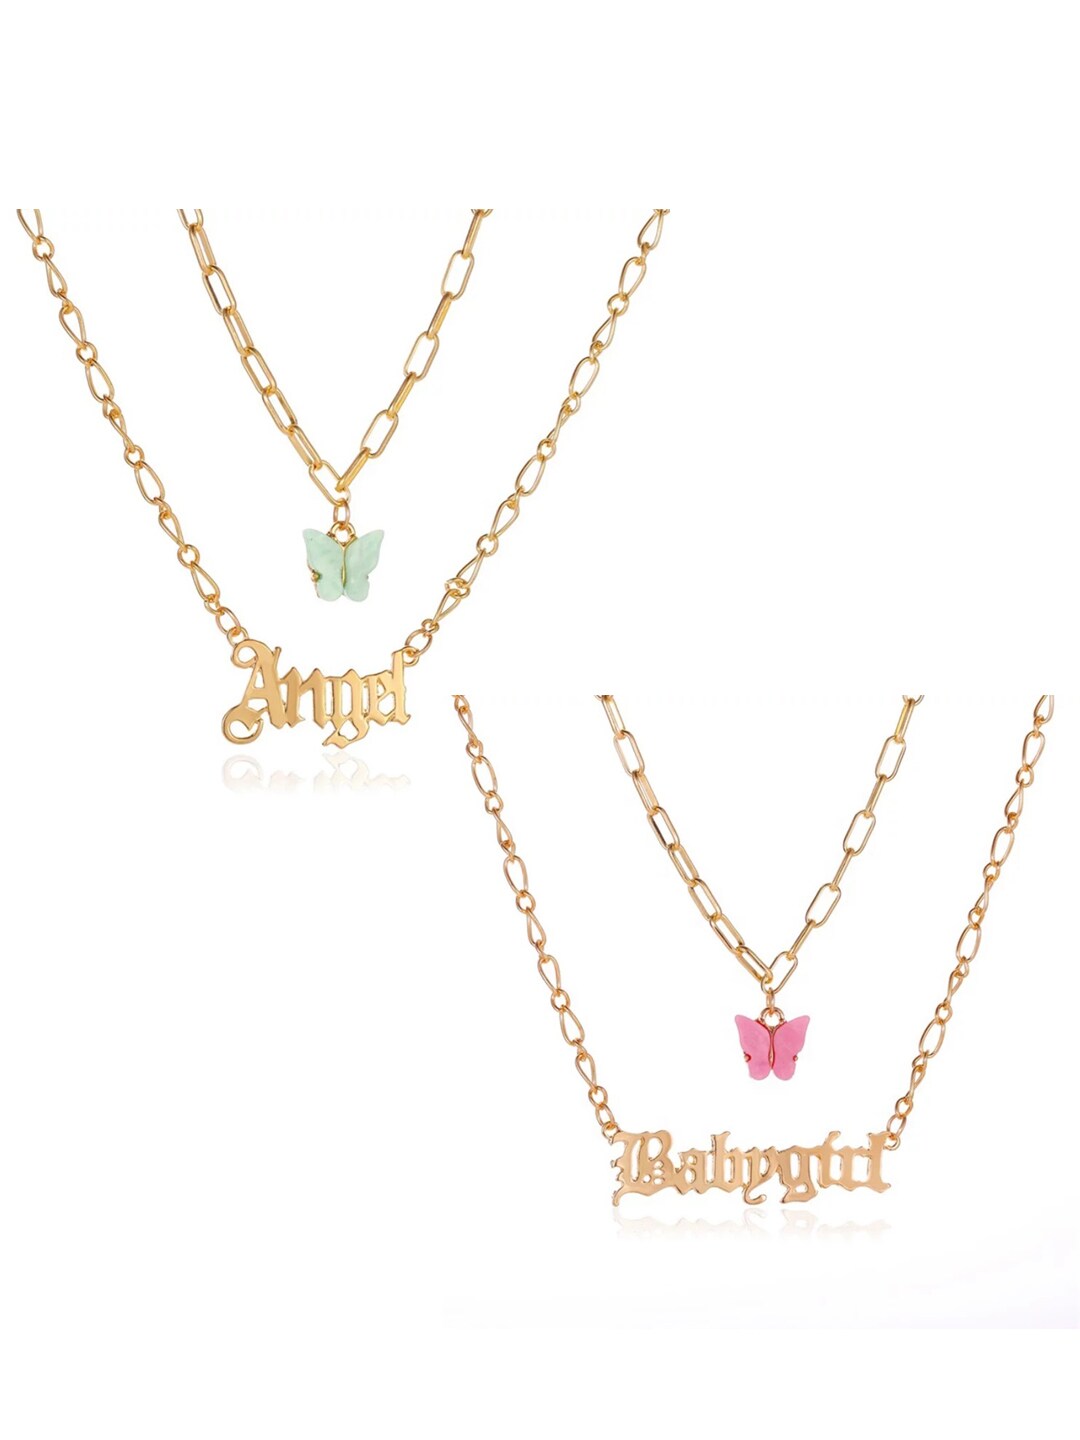 Vembley Set of 2 Gold-Plated Layered Necklaces Price in India